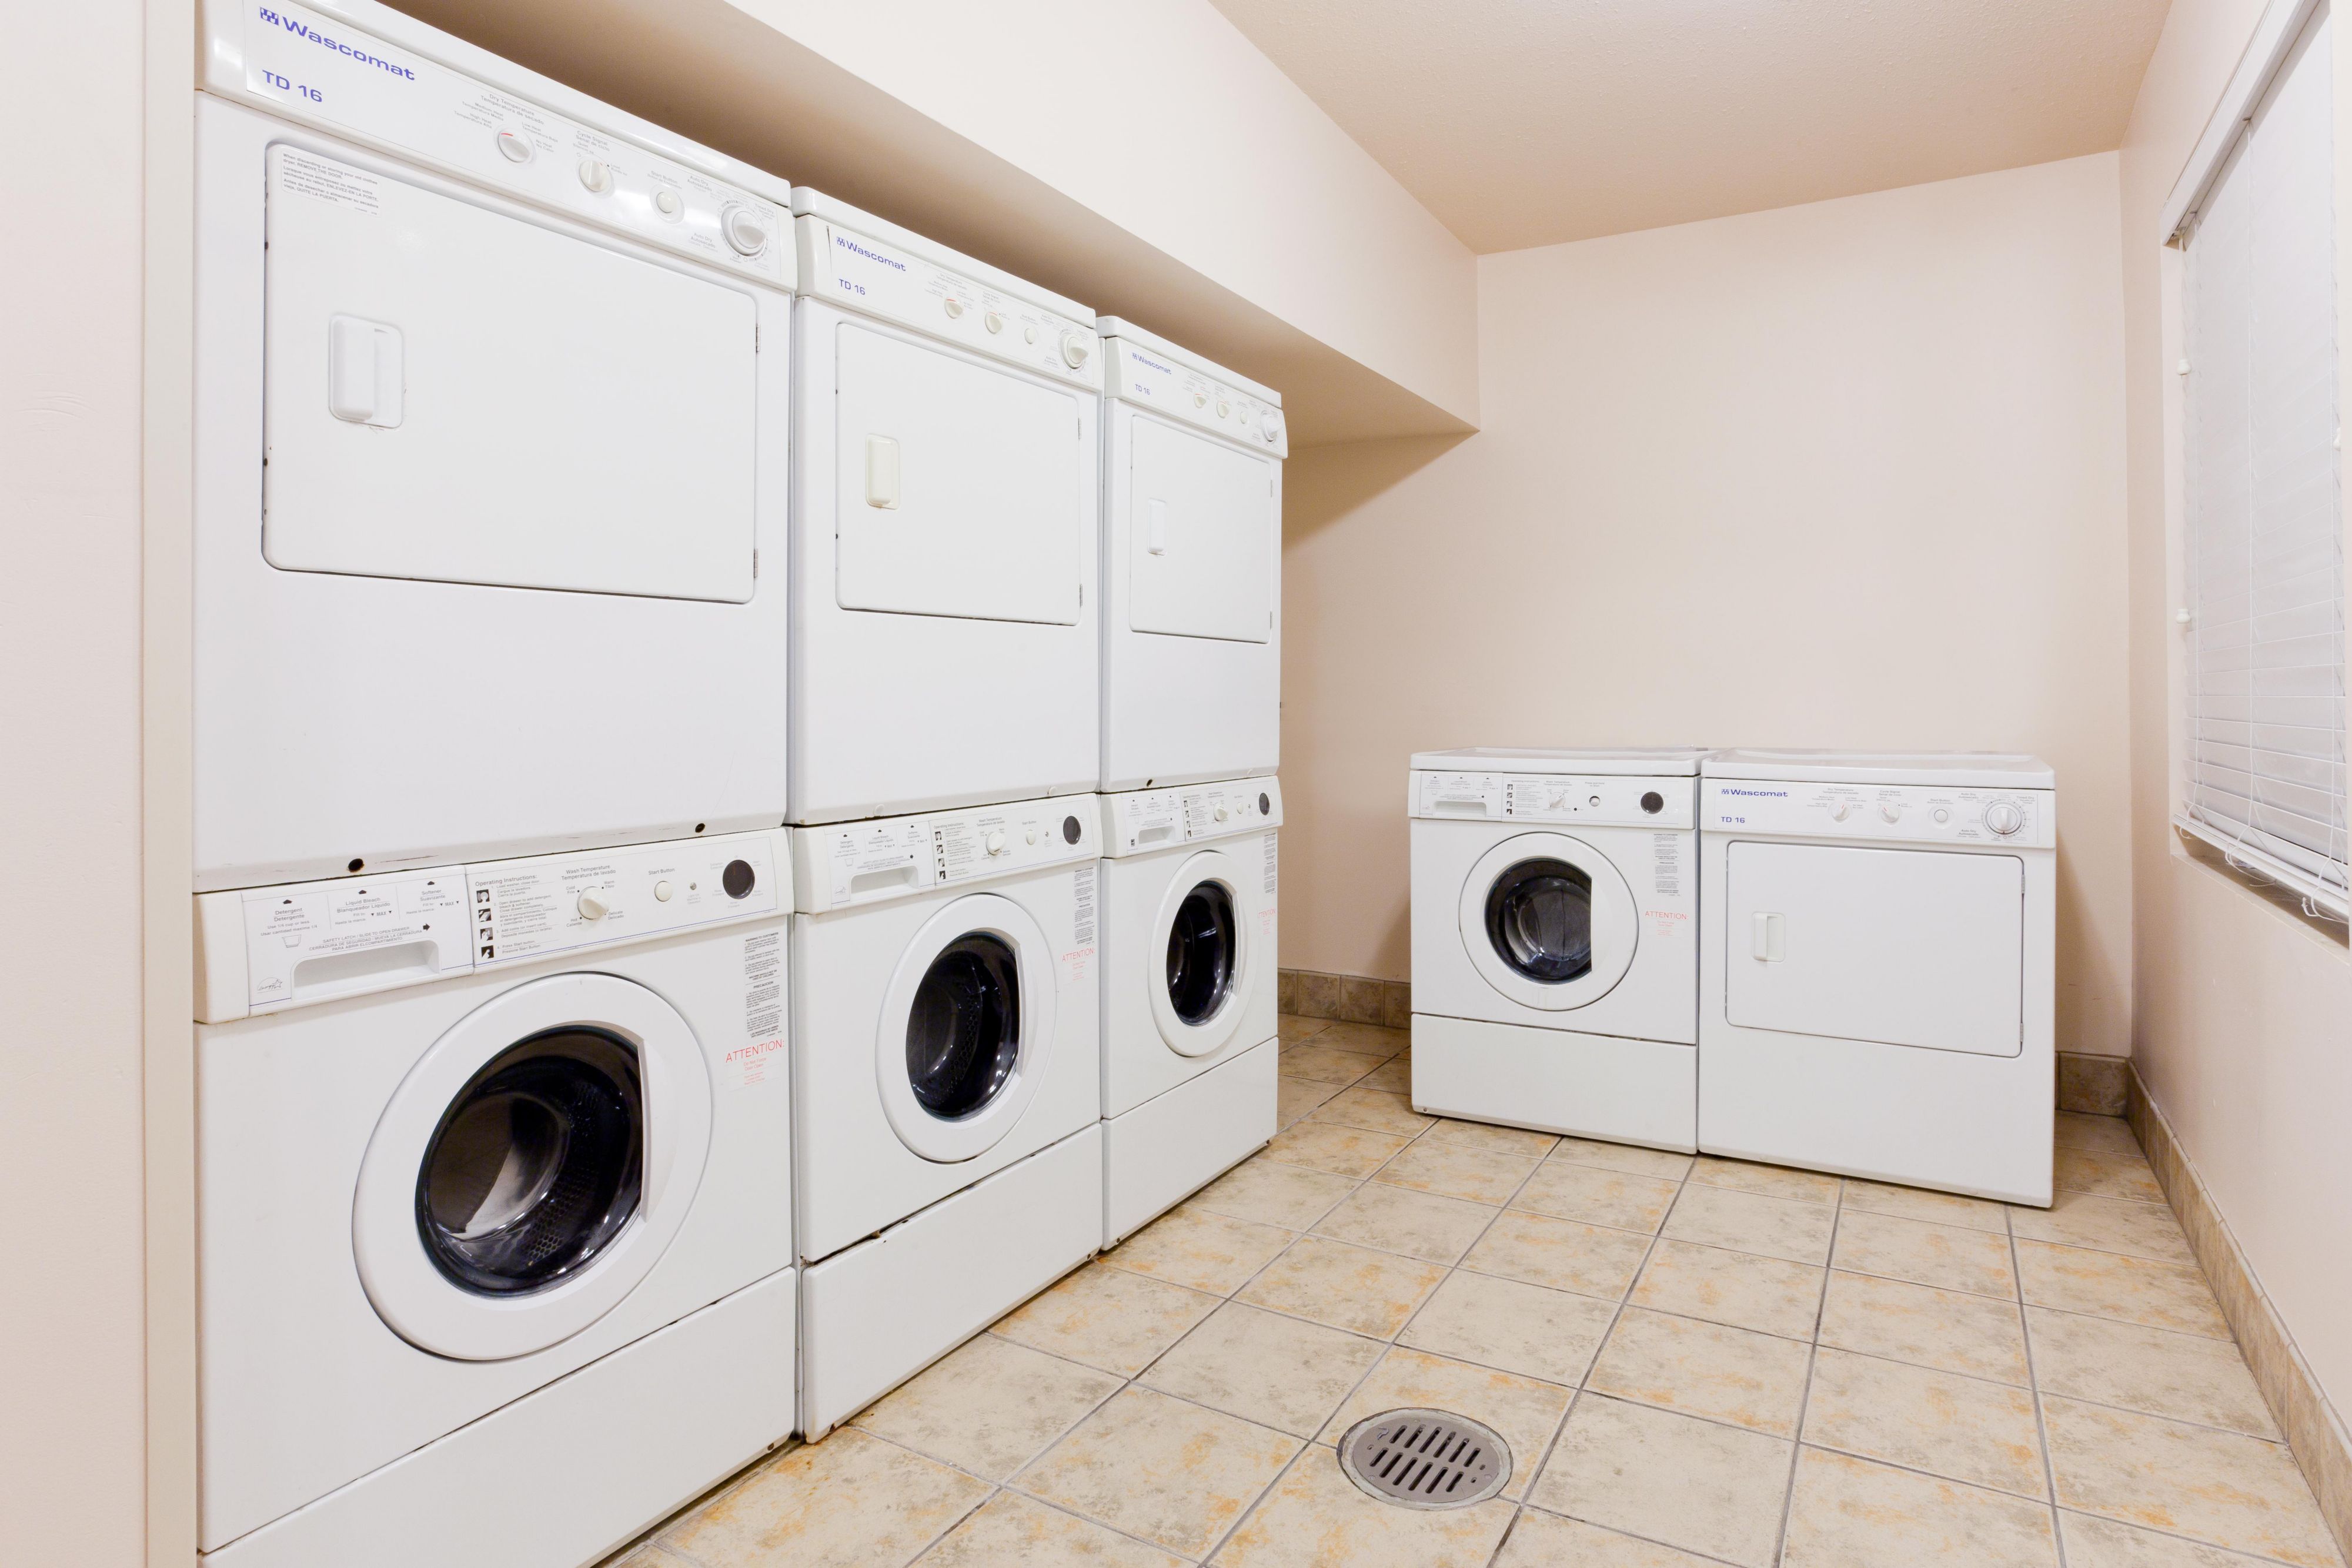 Help yourself to our brand new free onsite laundry machines & dryers when life gets messy.